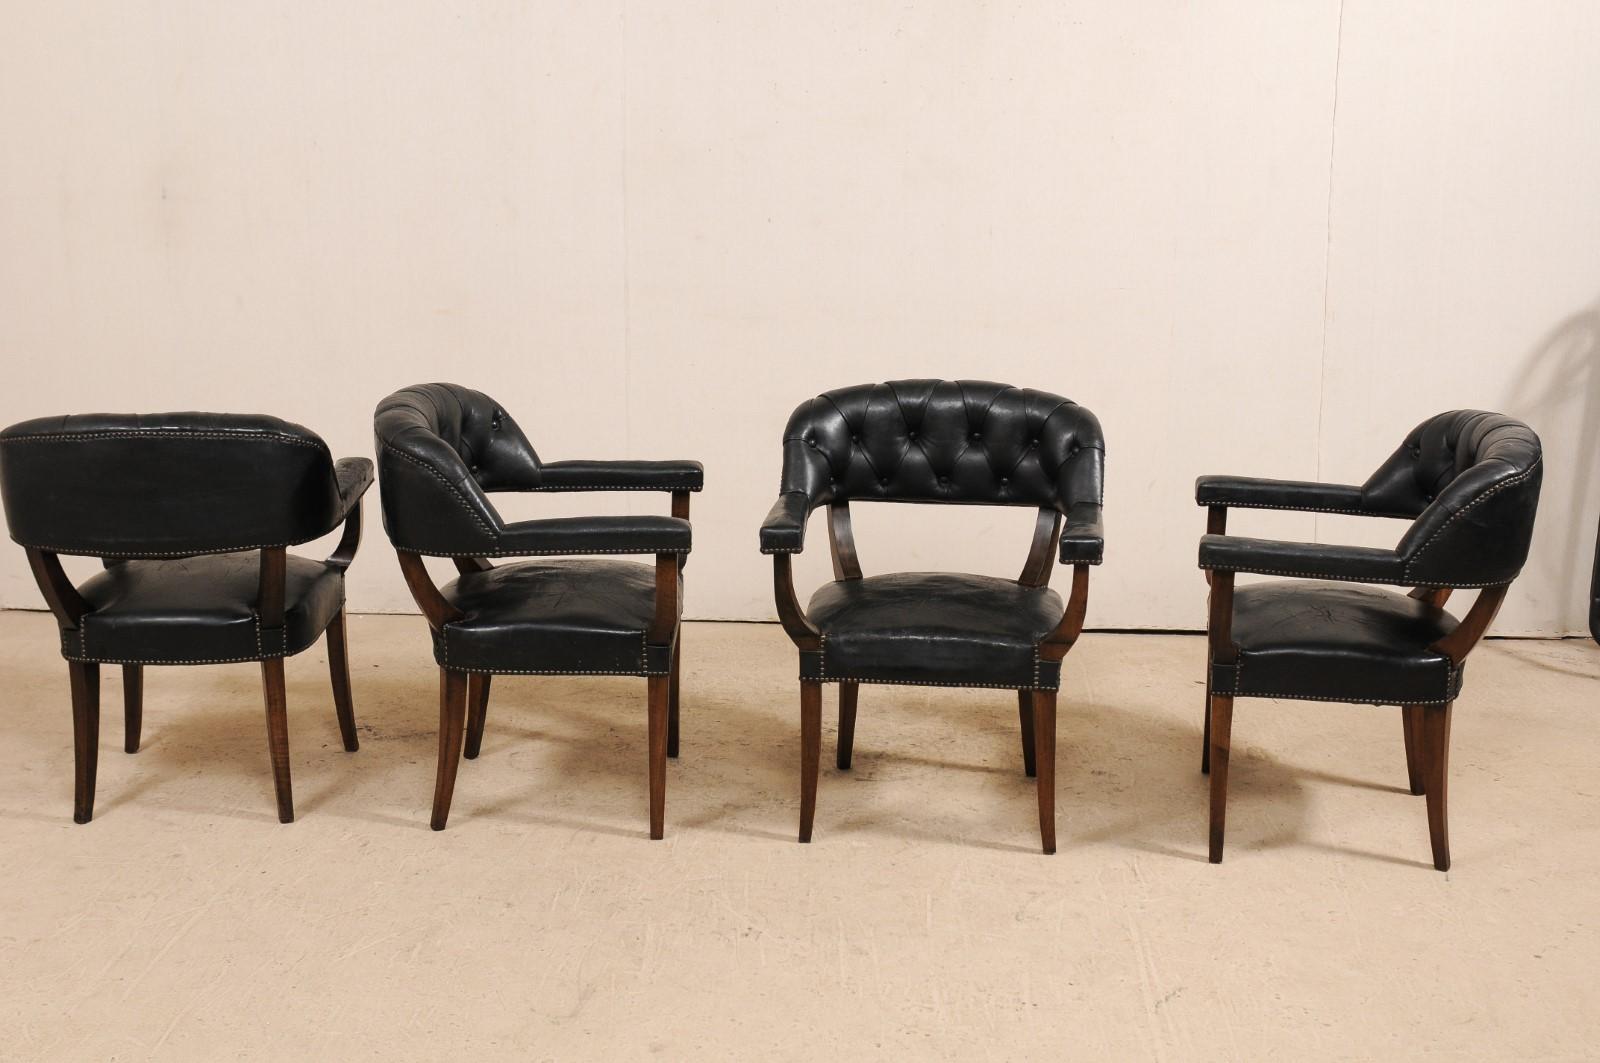 A handsome set of four French black leather arm chairs with rounded tub backs from the mid-20th century. This set of vintage chairs from France each feature their original tufted leather backs, straight arms and seat, presented upon wood saber legs.